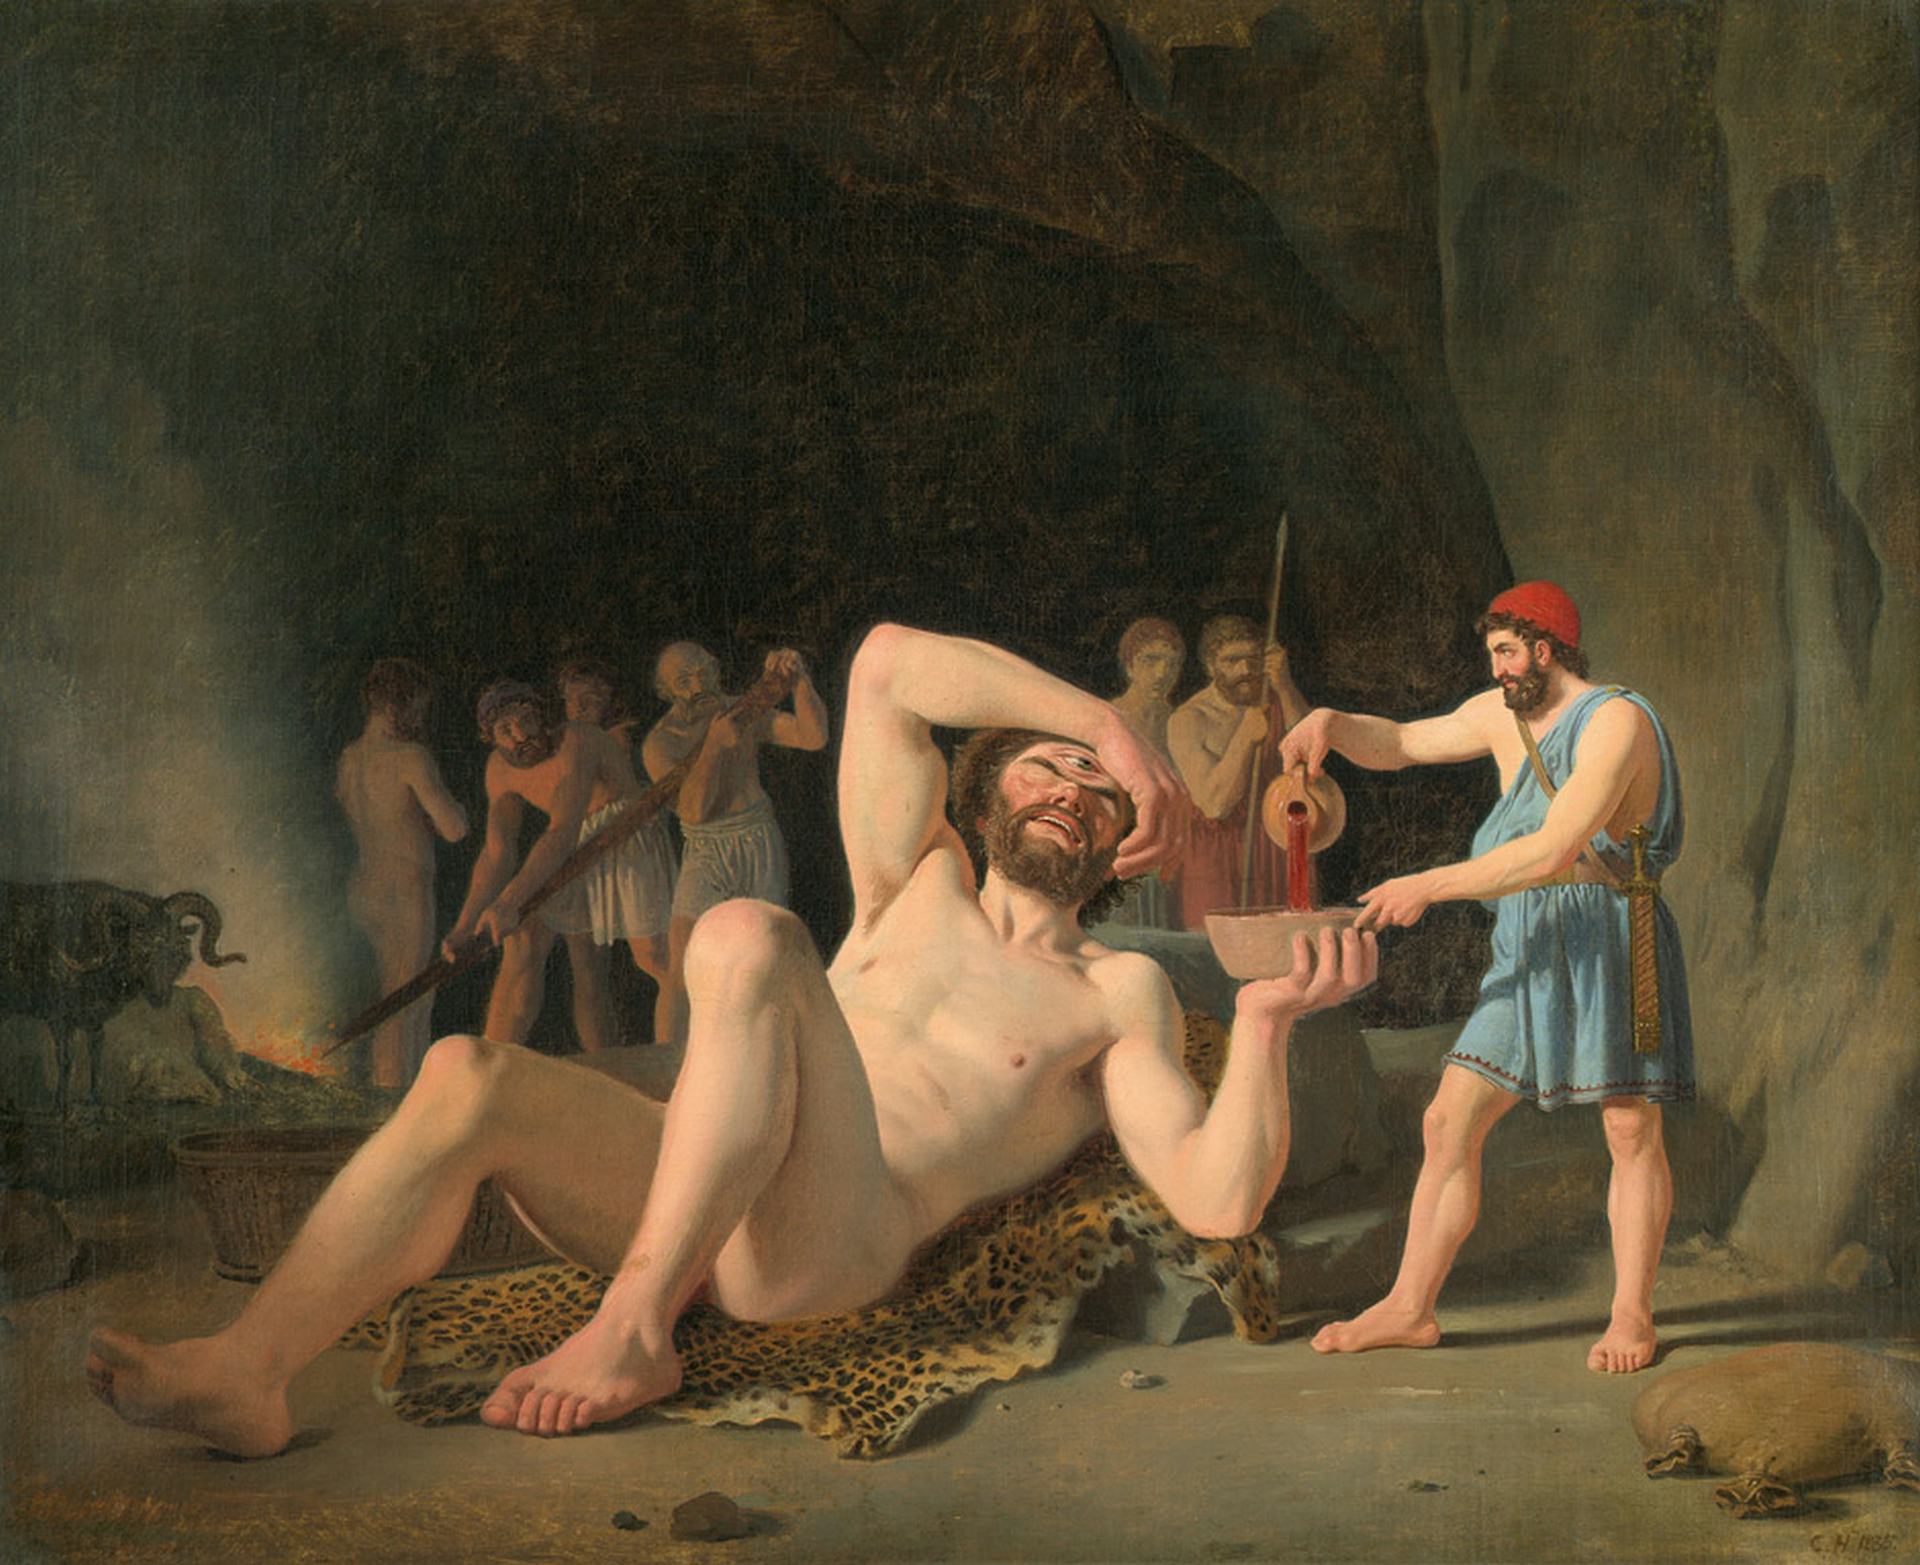 Ulysses in the cave of the Cyclops Polyphemus by Constantin Hansen (ca. 1835)